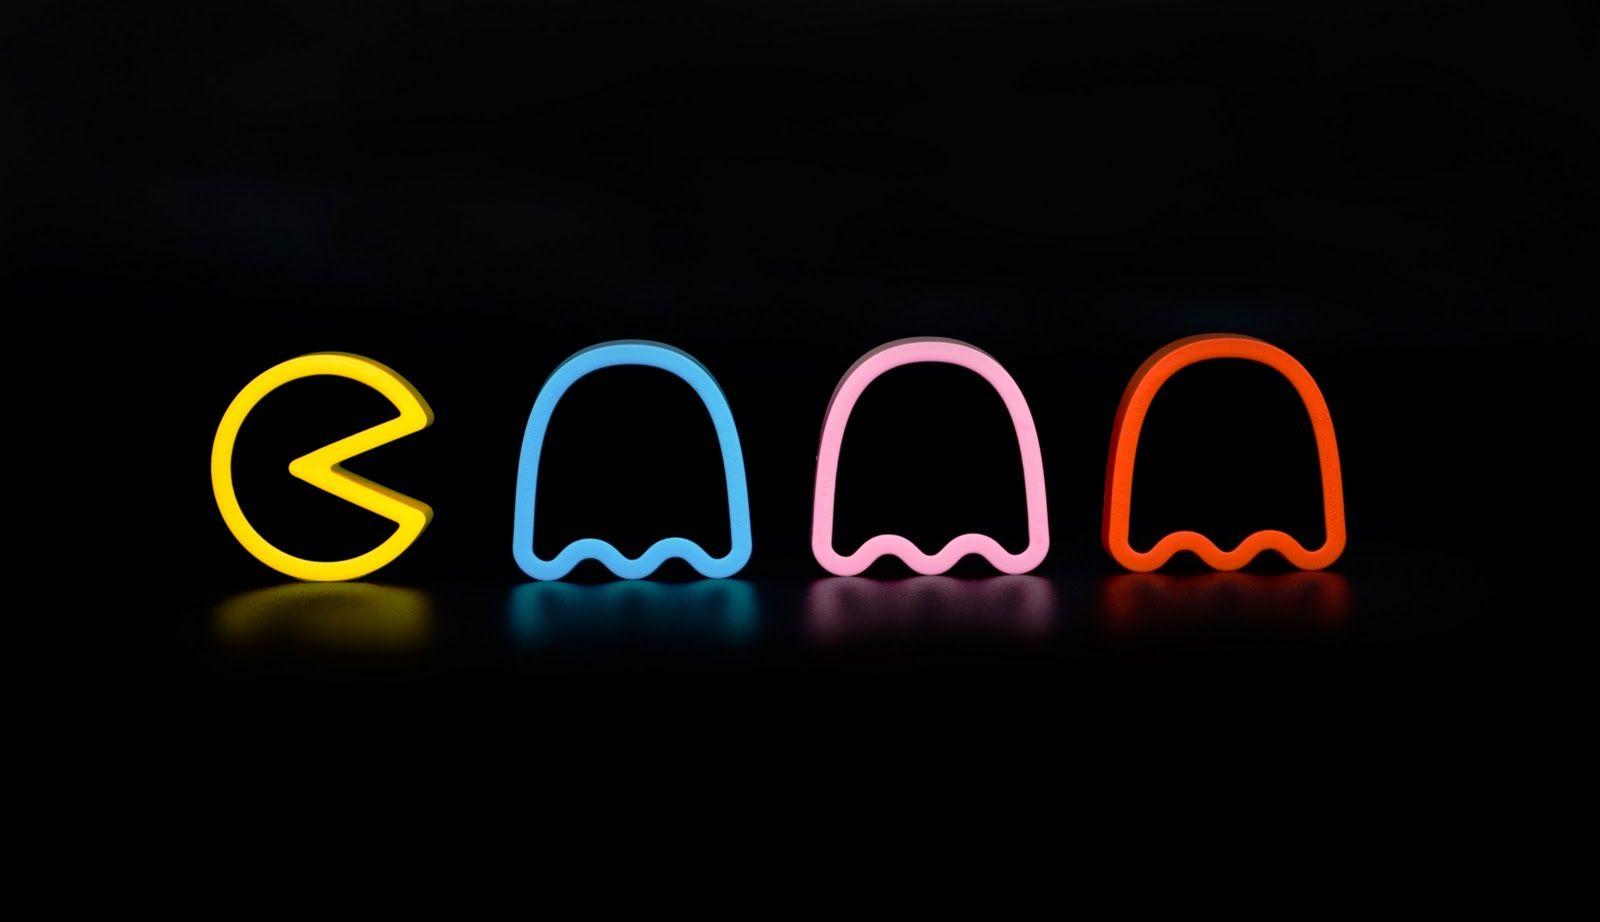 Pacman Wallpaper, iPhone Wallpaper, Facebook Cover, Twitter Cover